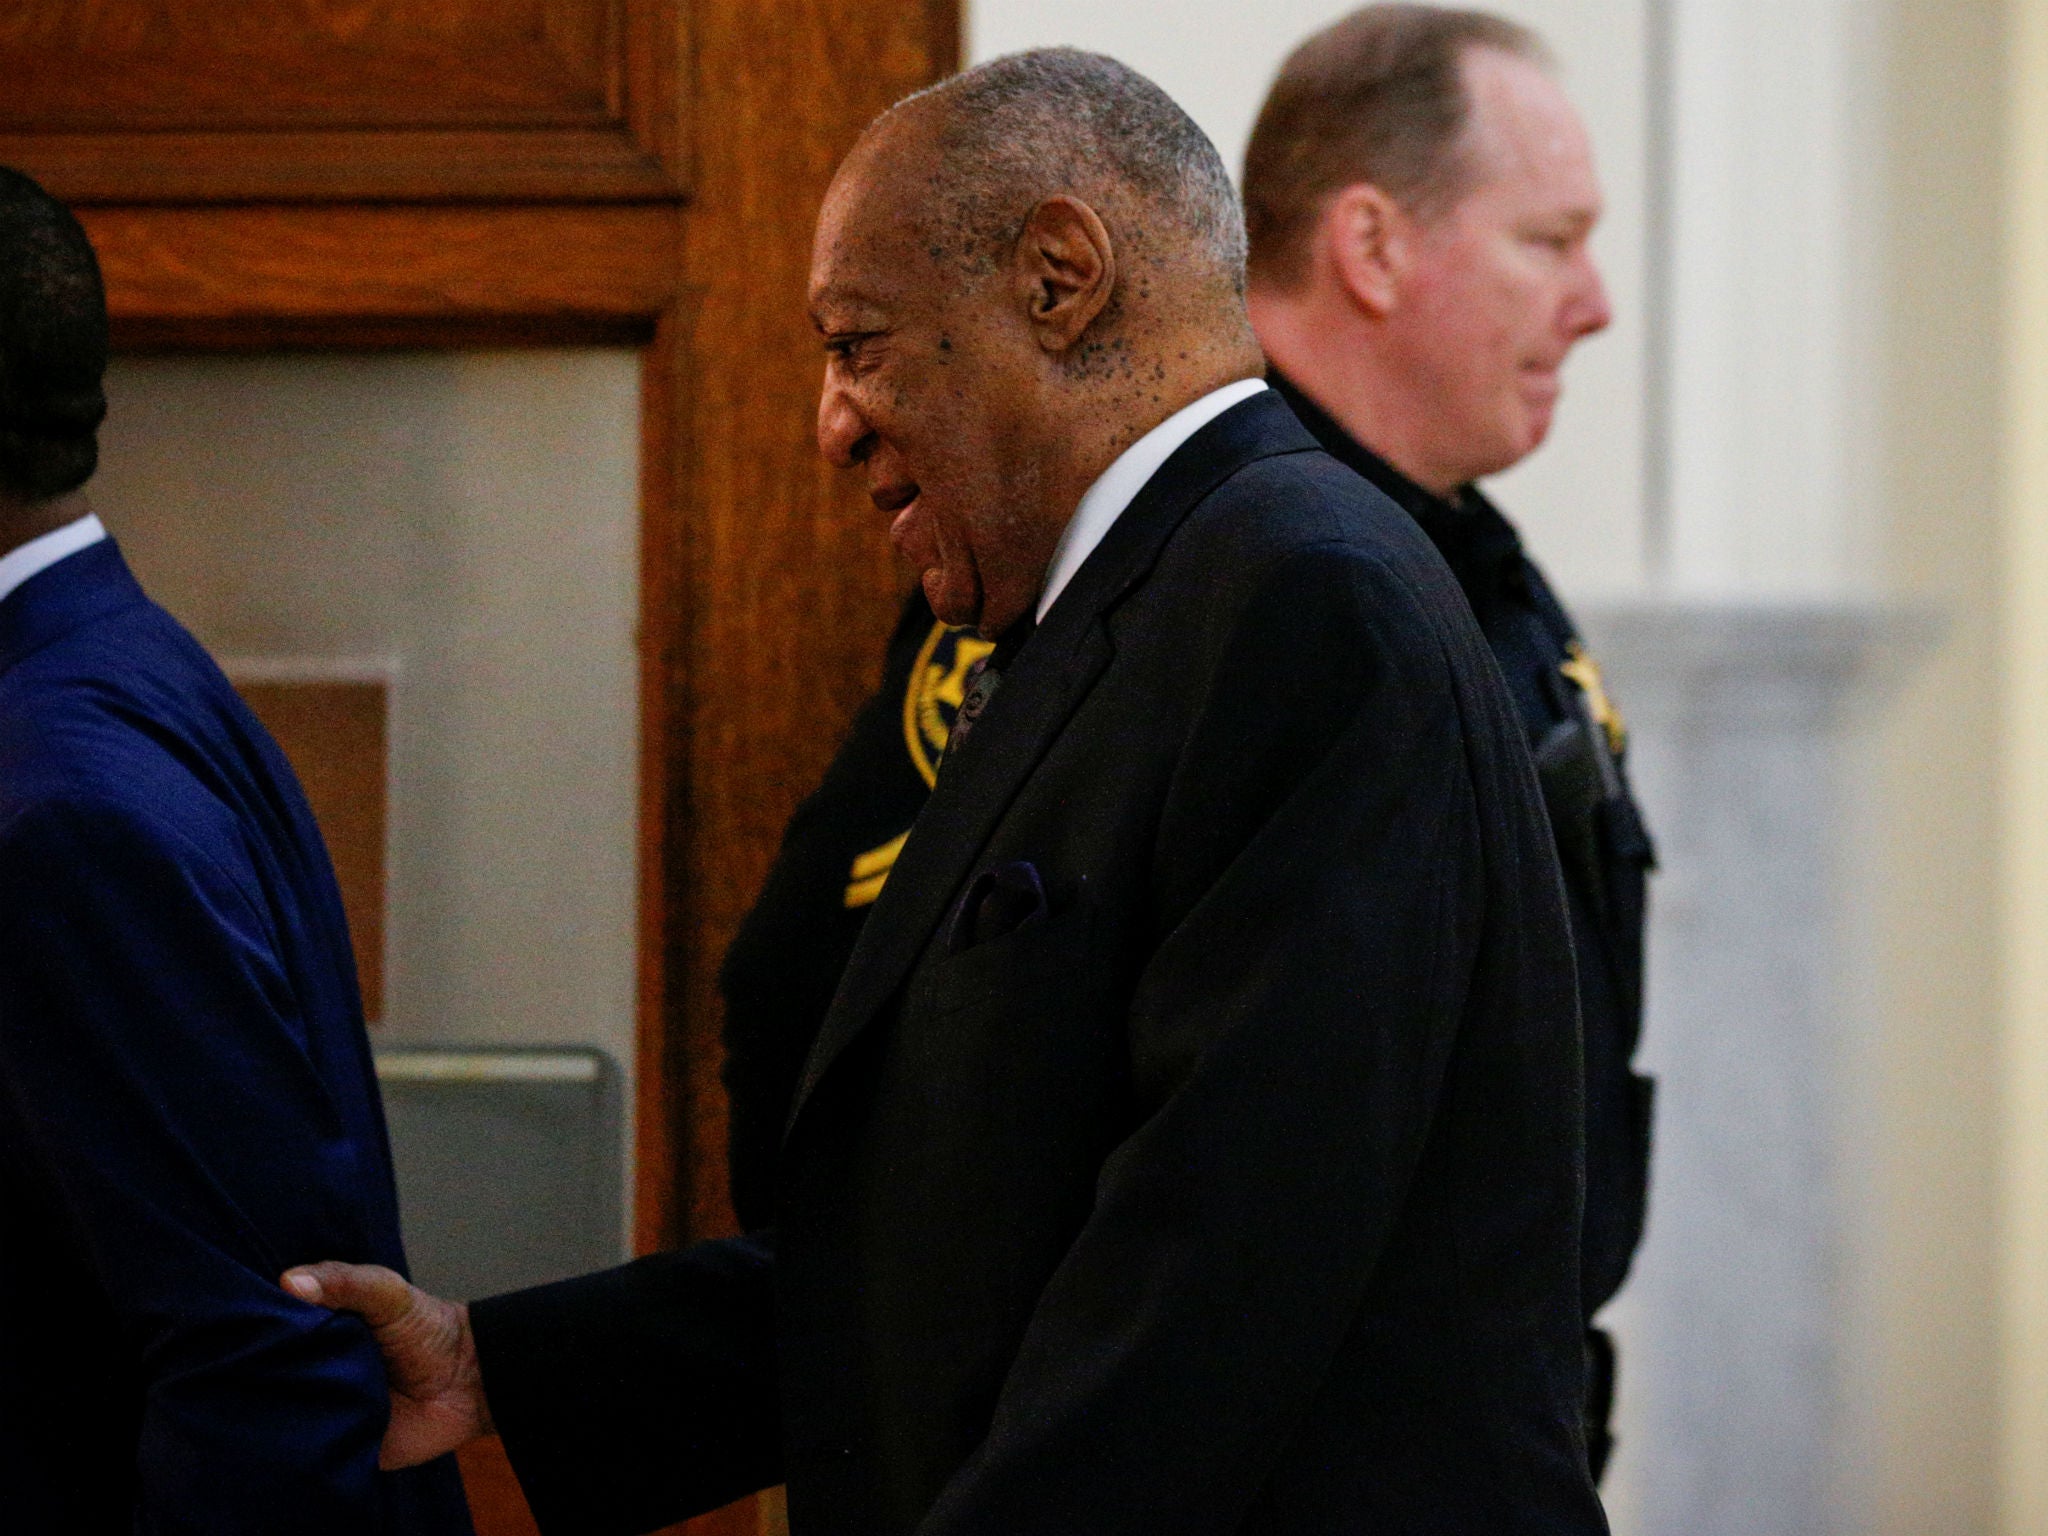 Bill Cosby arrives for a pretrial hearing for his sexual assault trial in Norristown, Pennsylvania